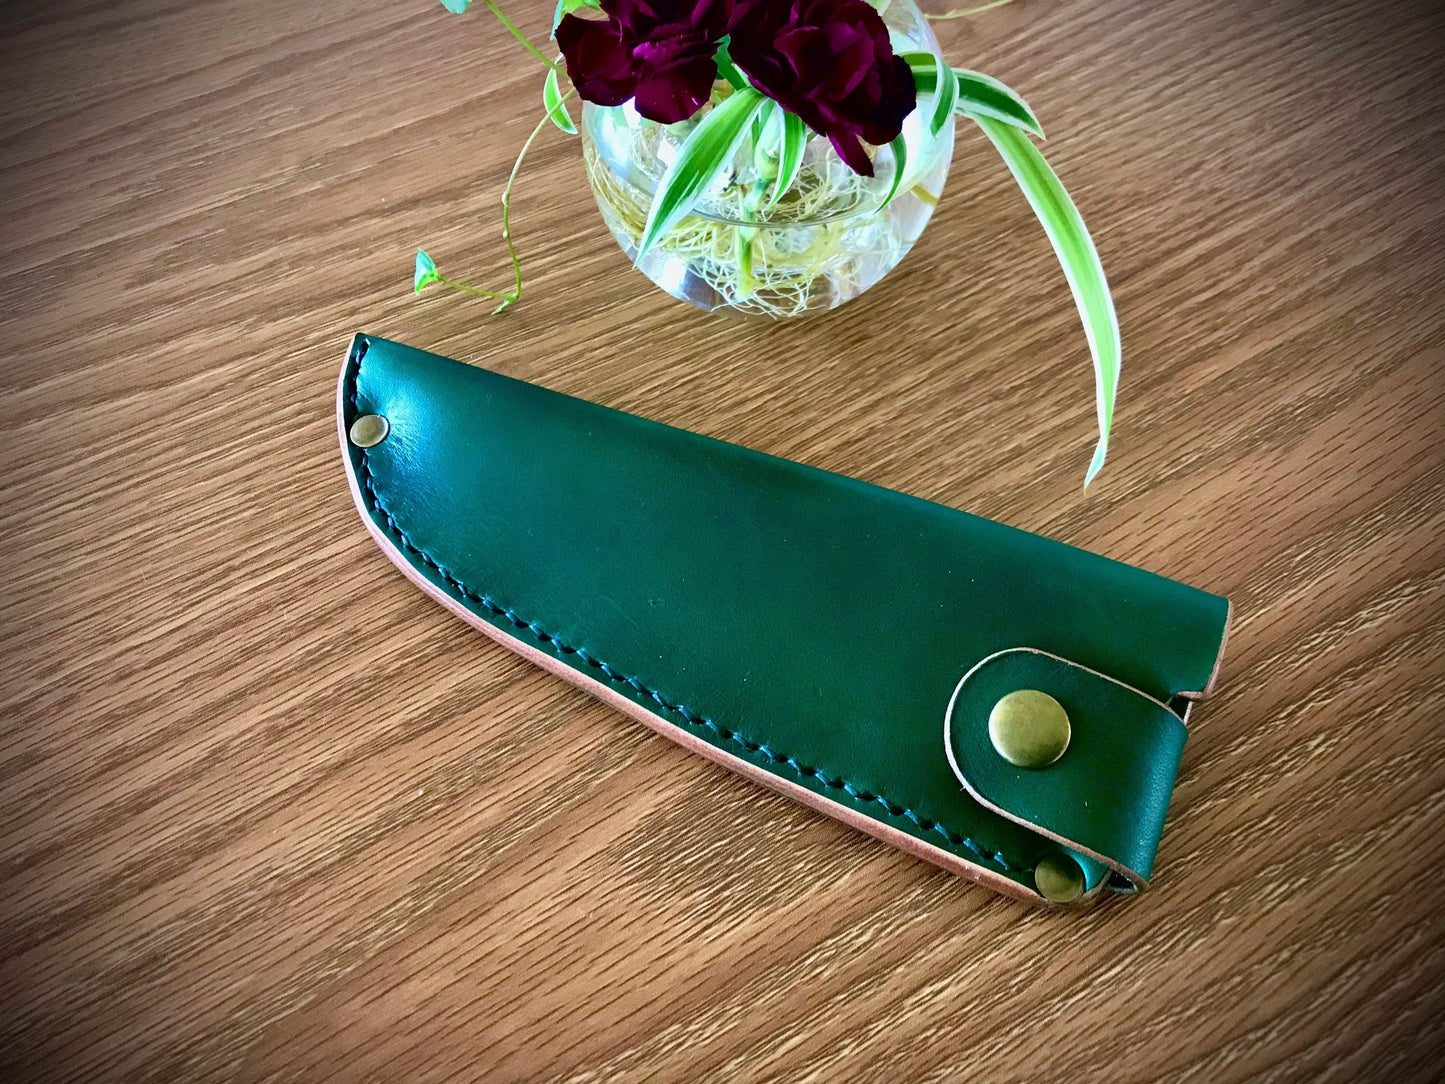 Handcrafted leather kitchen knife sheath -Plain